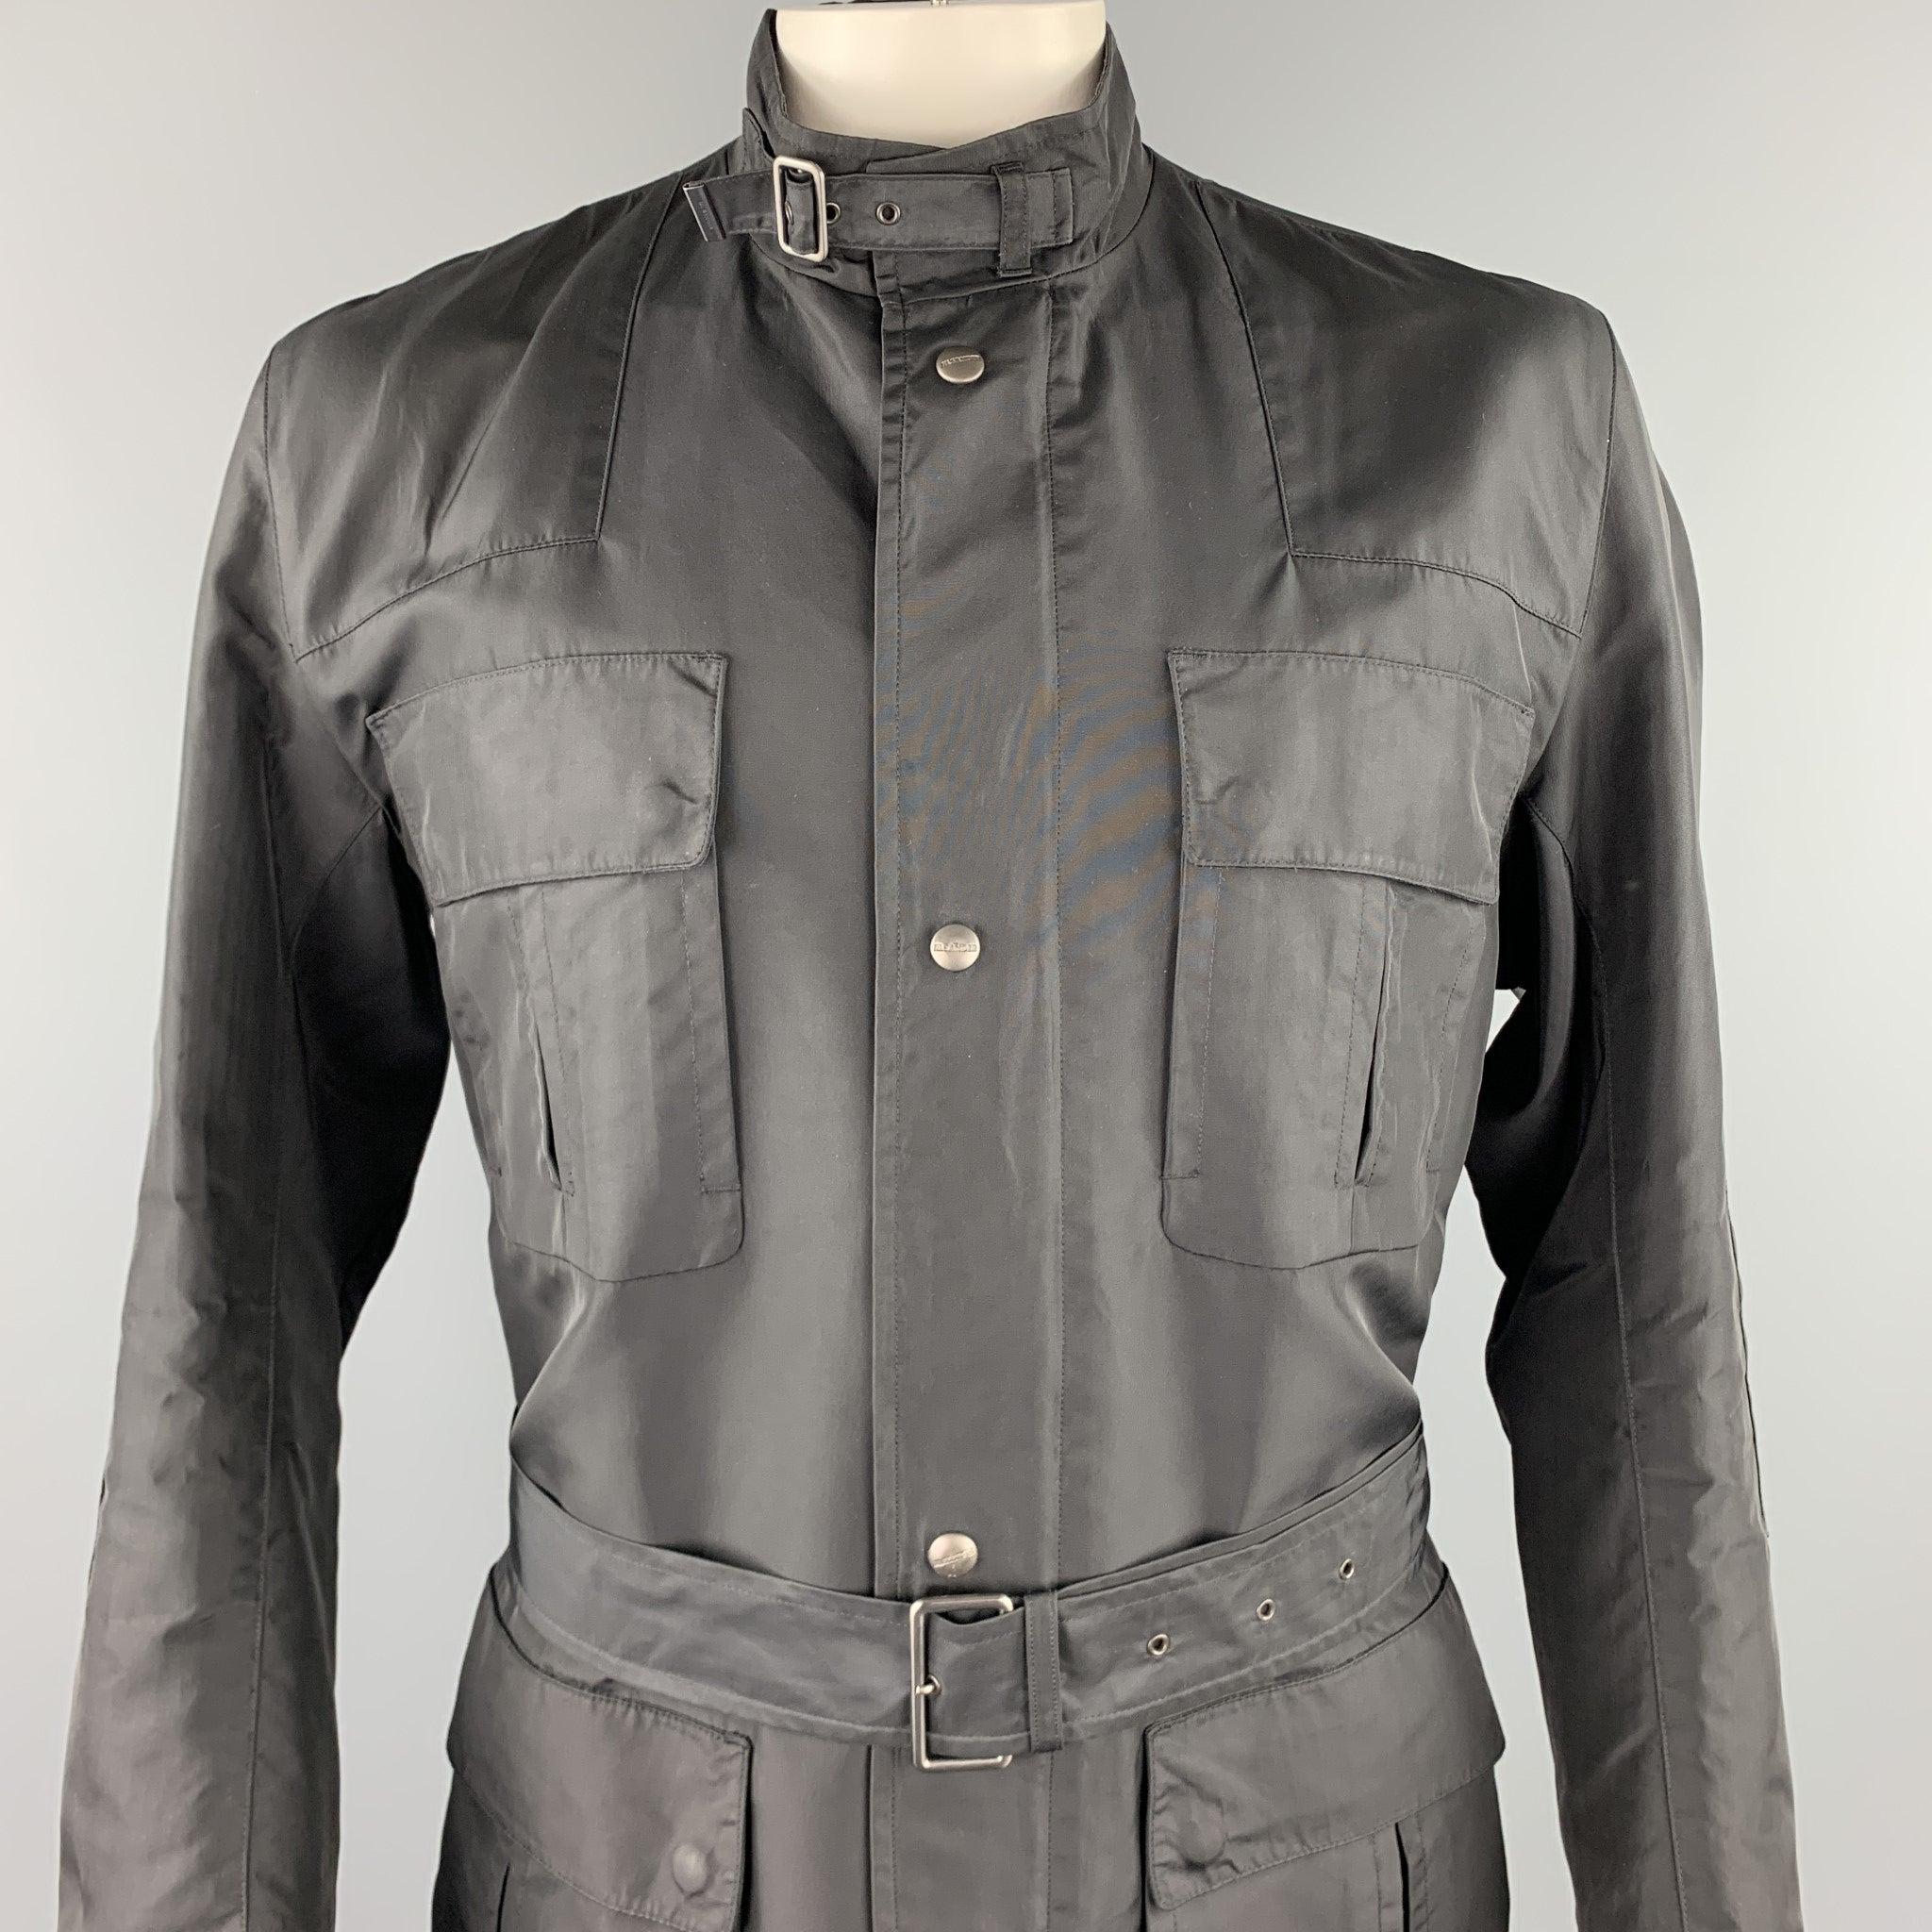 JIL SANDER jacket comes in a black poliammide featuring a belted style, flap pockets, belted collar, and a zip 7 snap button closure. Made in Italy.Excellent
Pre-Owned Condition. 

Marked:   IT 54 

Measurements: 
 
Shoulder: 18.5 inches 
Chest: 44